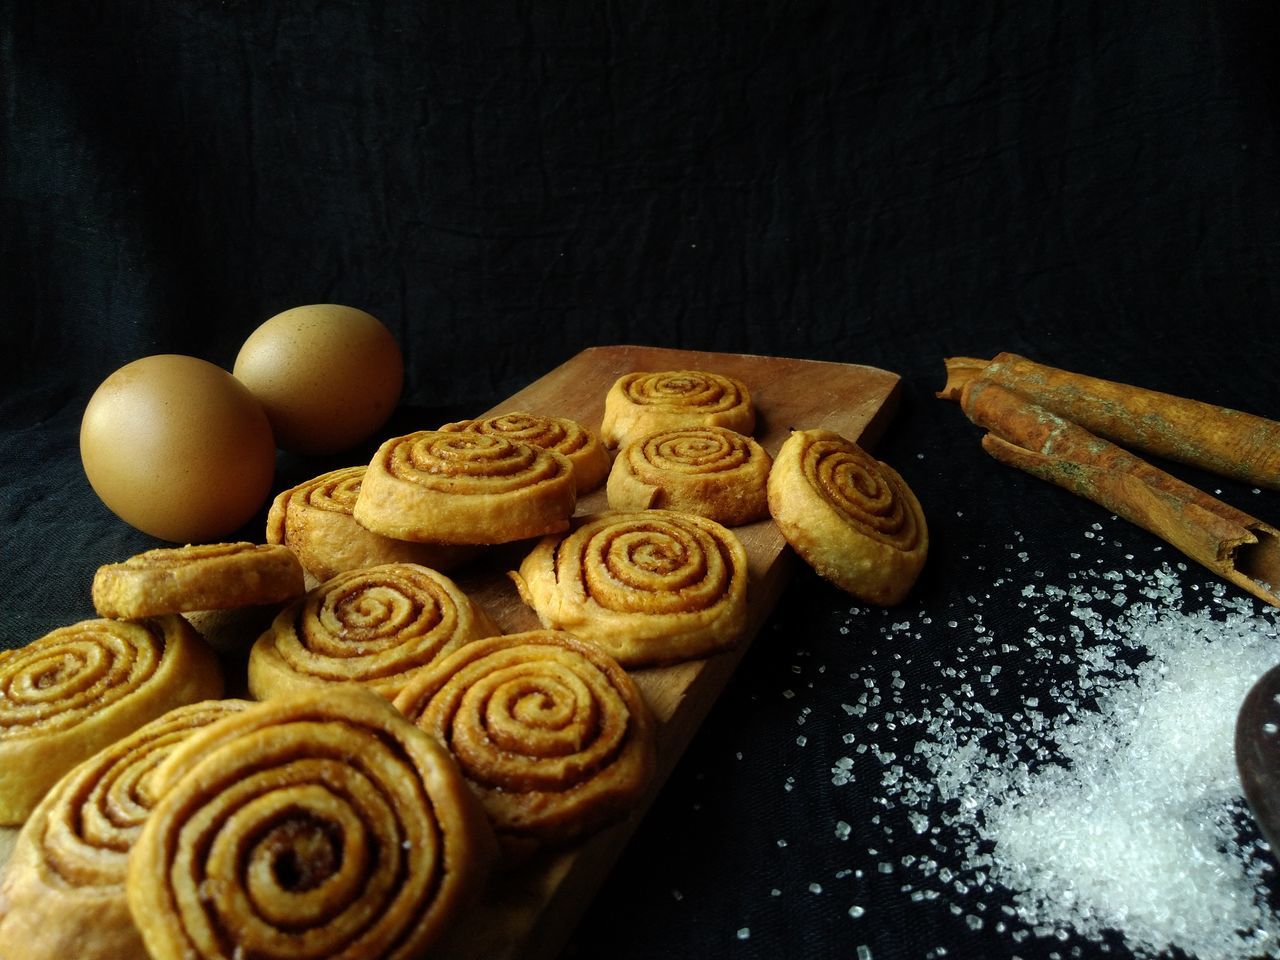 food, food and drink, baked, sweet food, freshness, indoors, snack, no people, cookie, still life, dessert, sweet, flour, wood, high angle view, table, bakery, baked pastry item, dough, black background